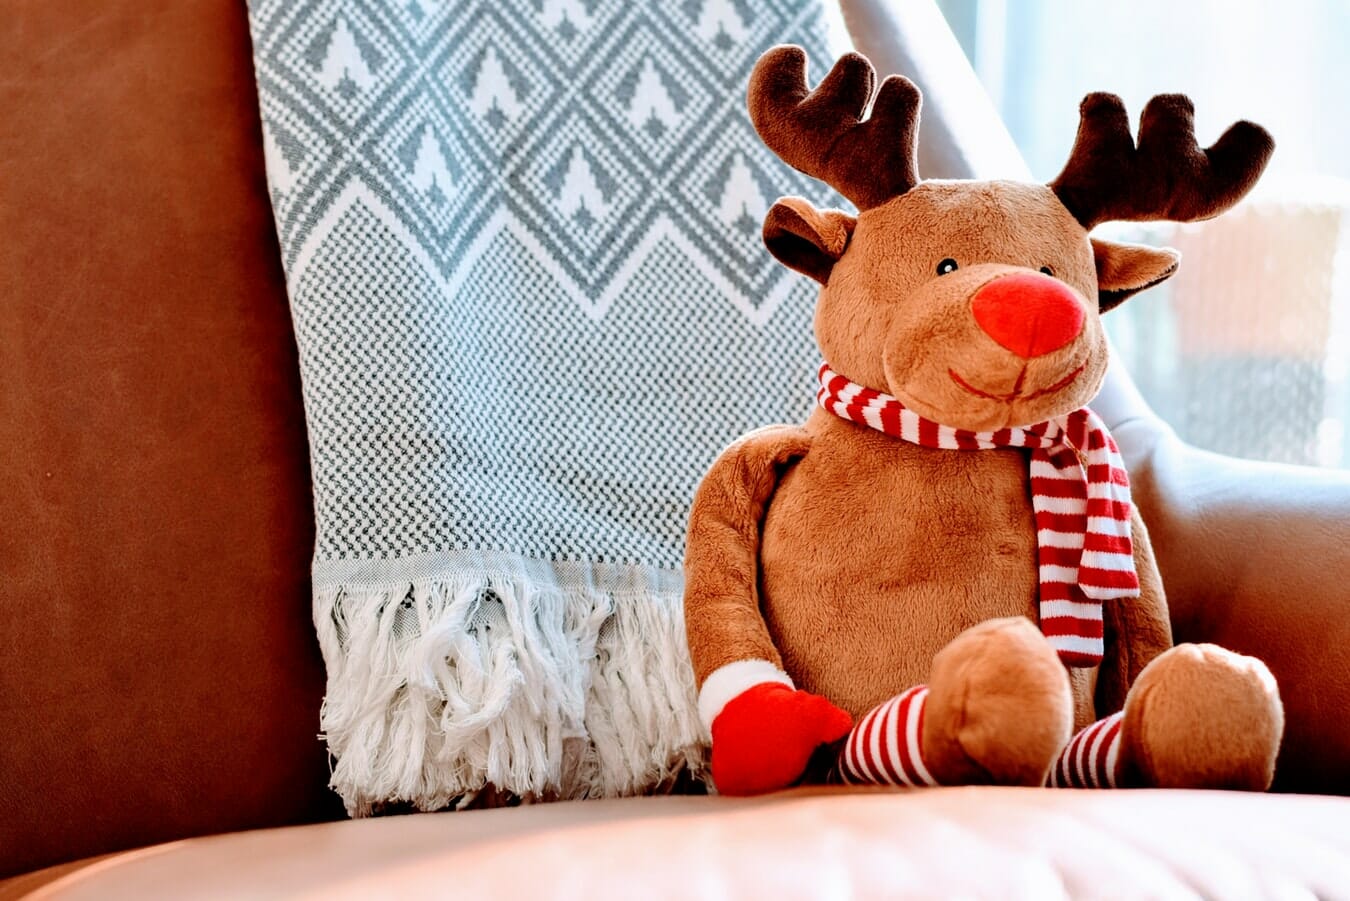 A stuffed reindeer sitting on a chair with a blanket.